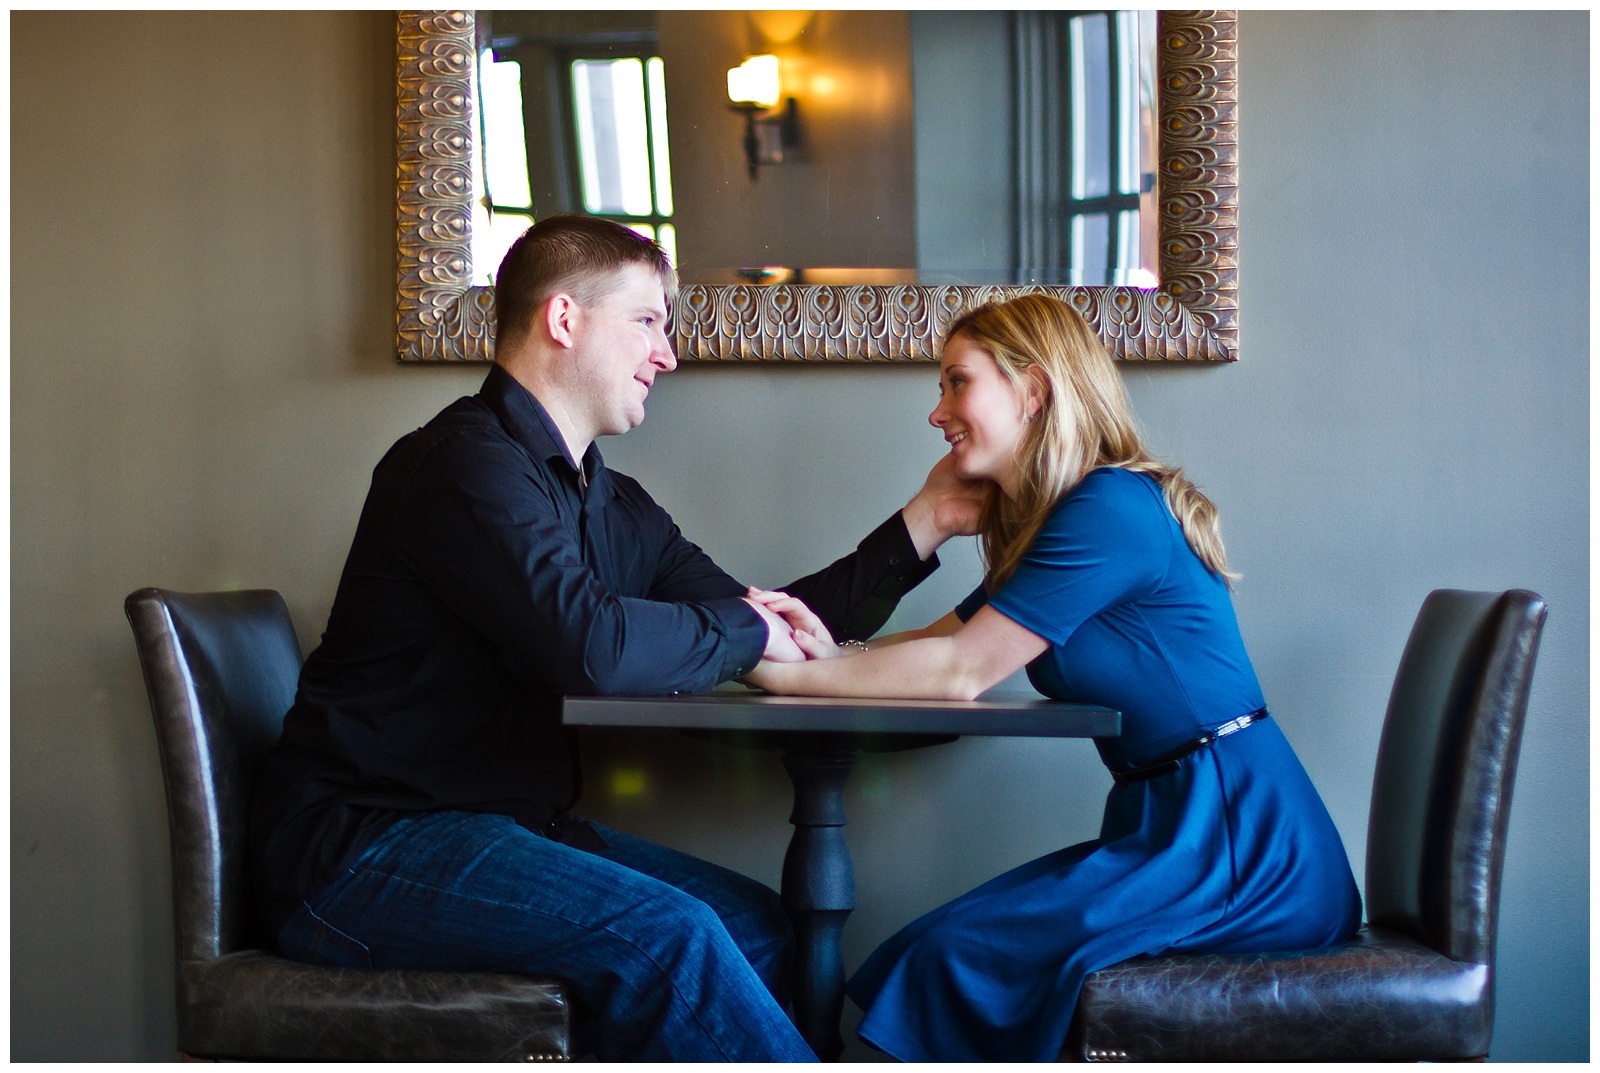 An engagement session at The Elms in Excelsior Springs, Missouri.